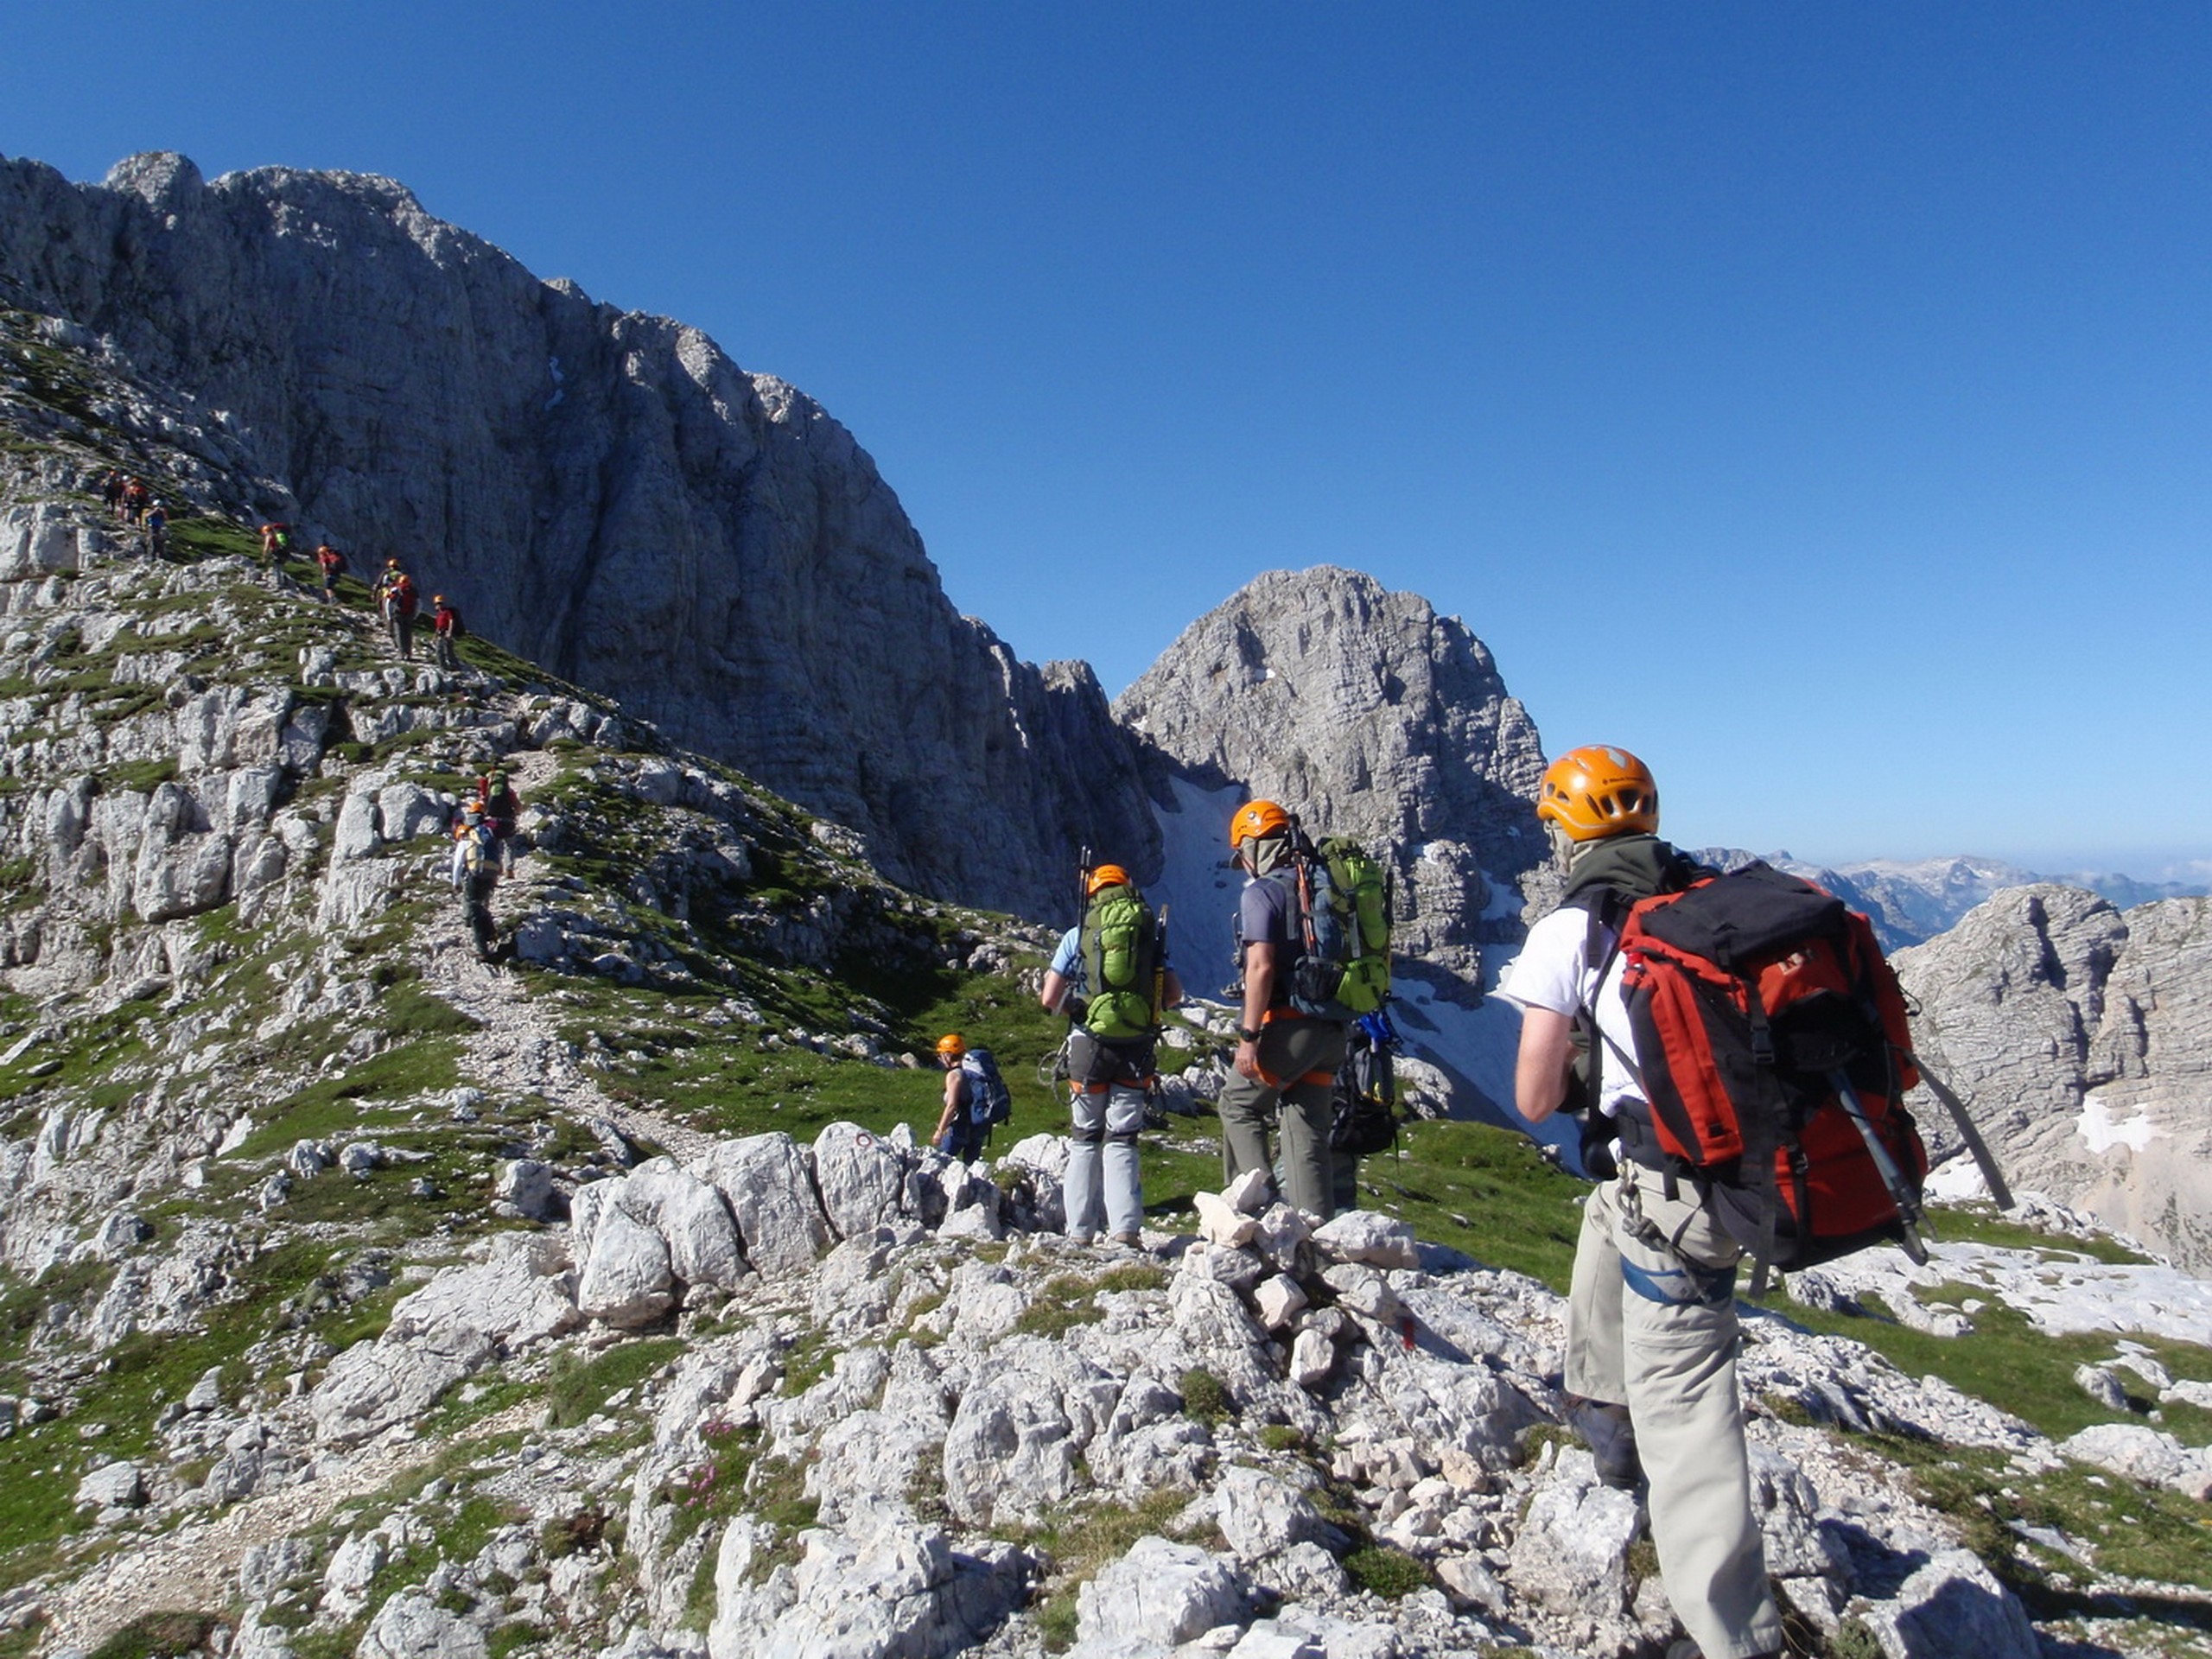 Group of hikers with a guide ascending to Triglav